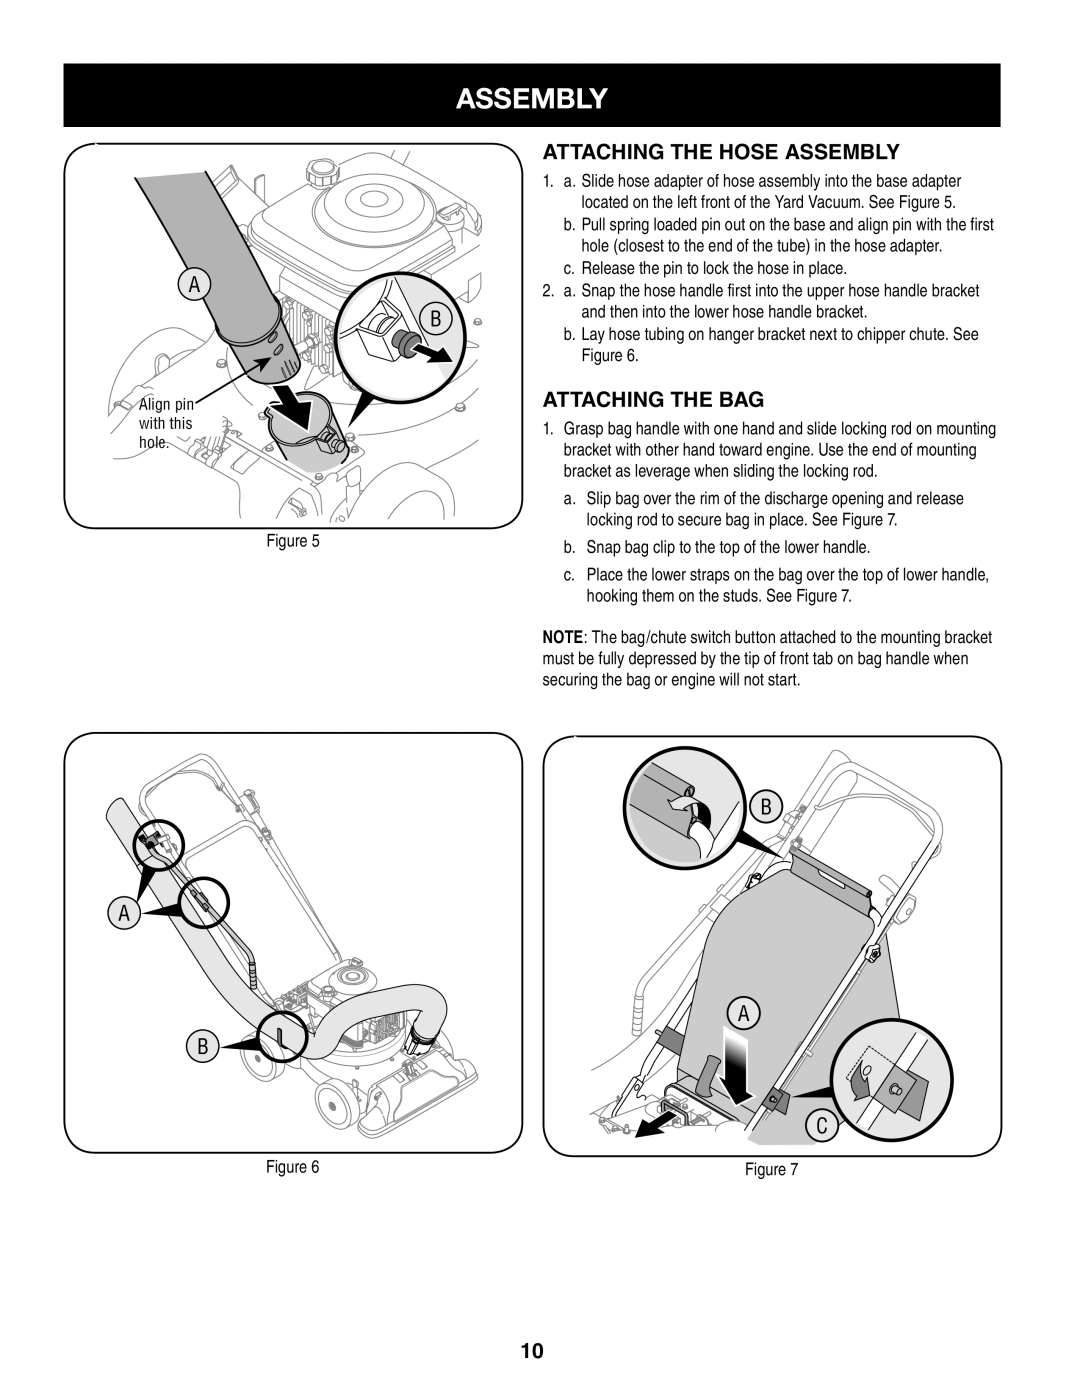 Craftsman 247.77013.0 manual Attaching The Hose Assembly, Attaching The Bag, B A A B C 